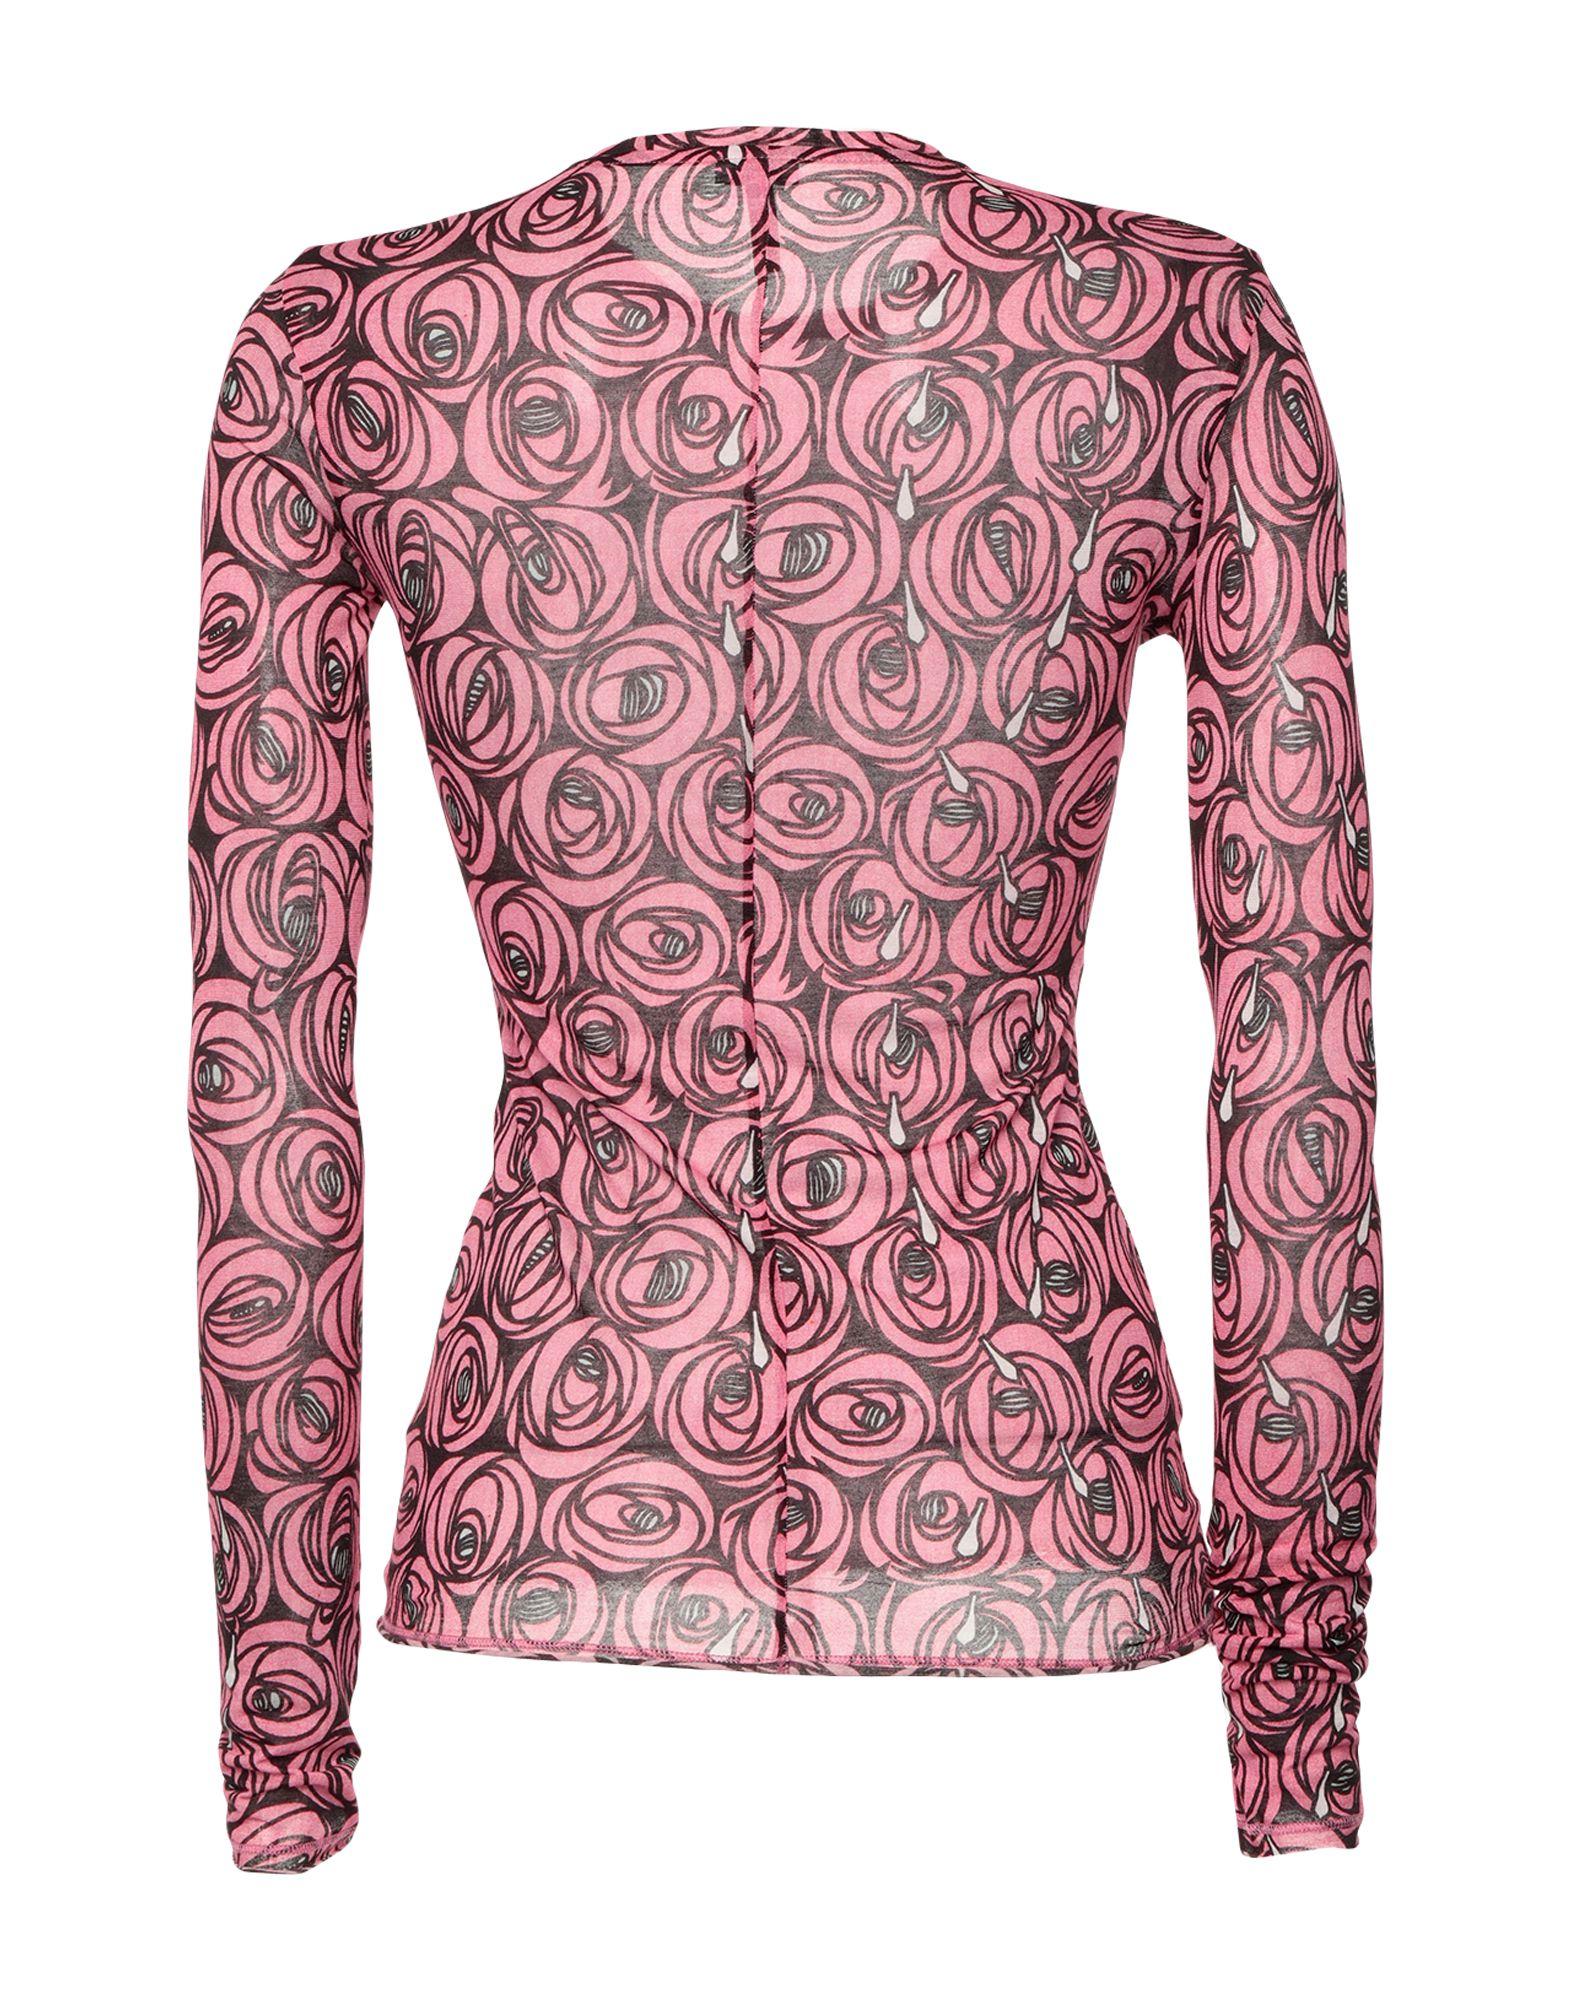 Loewe Floral Cotton Top in Pink - Lyst